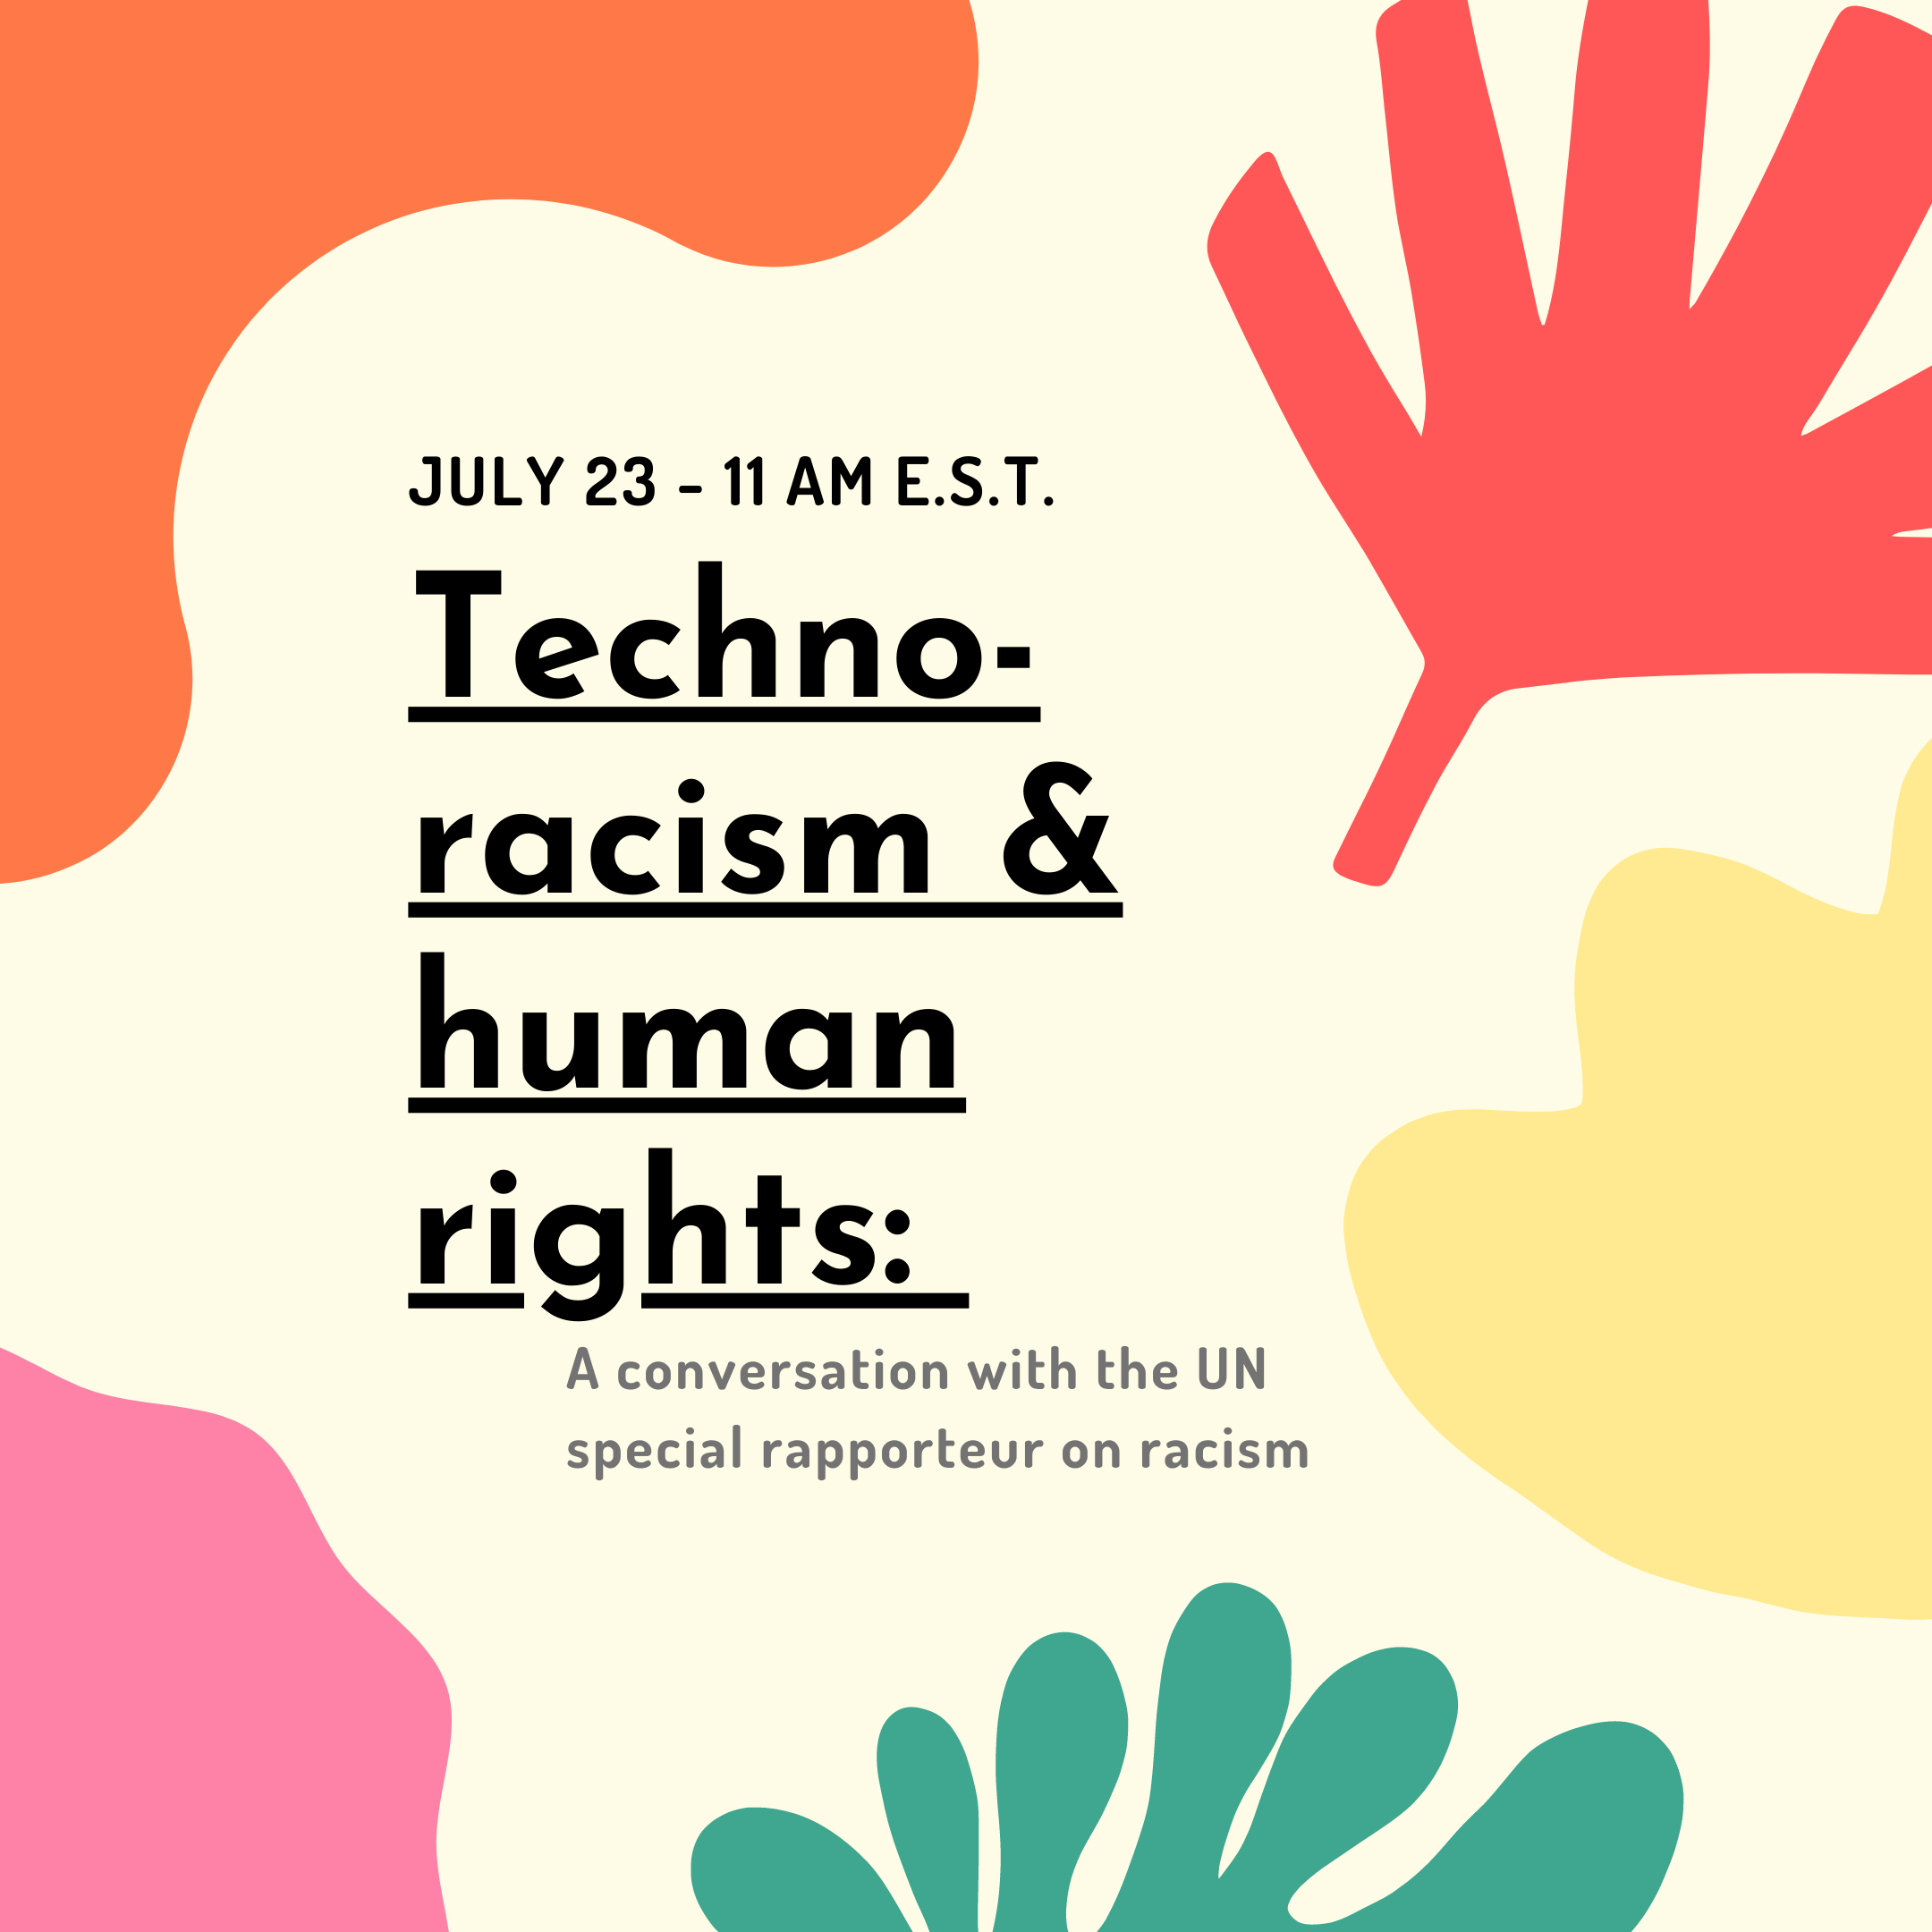 Techno-racism & human rights_.png